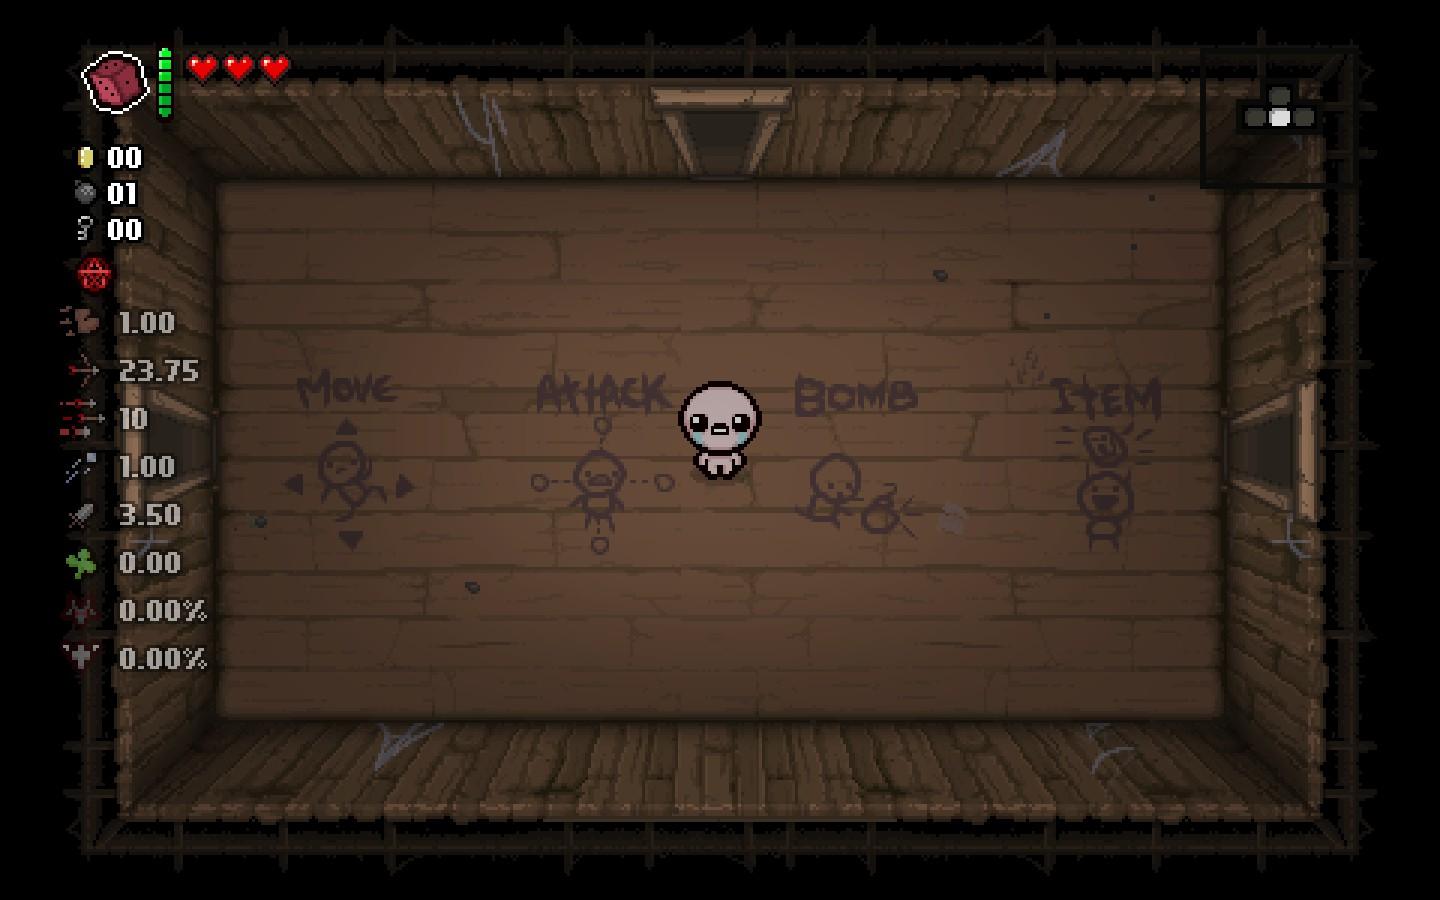 binding of isaac afterbirth + mods without steam